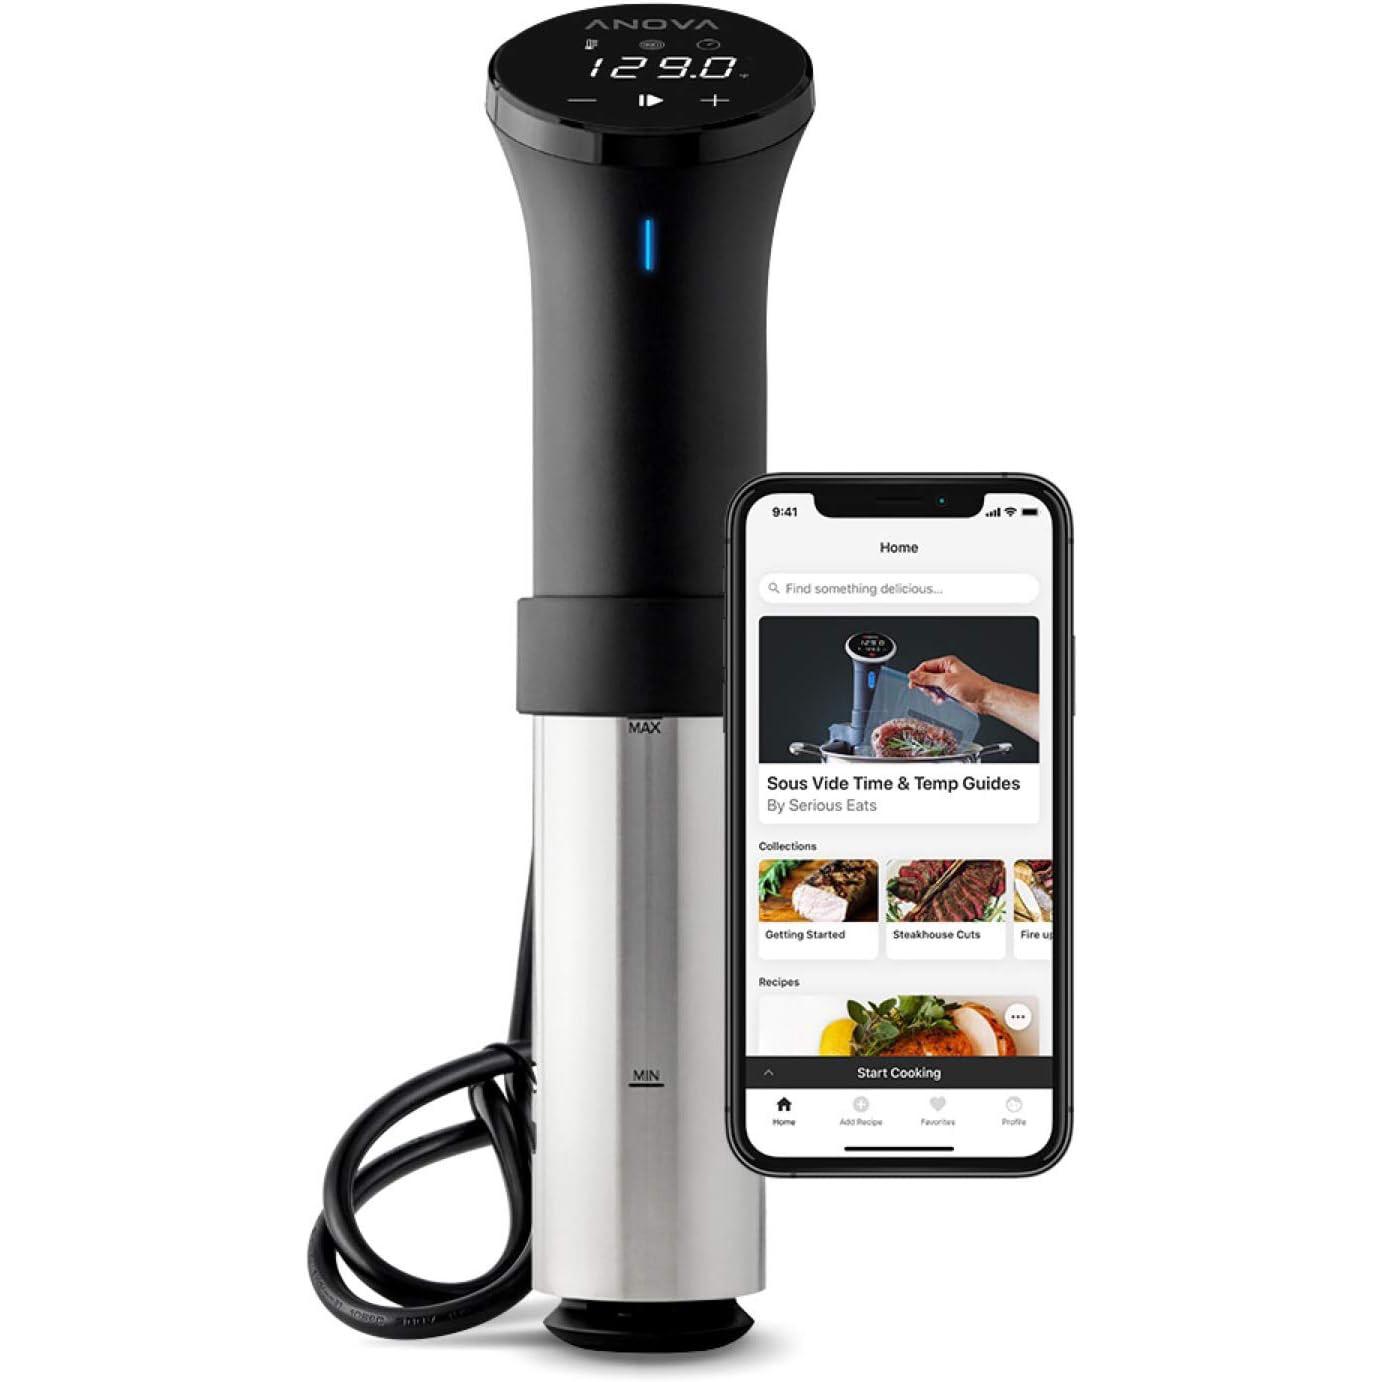 Anova Culinary Sous Vide Precision Cooker 2.0 for $109.99 Shipped